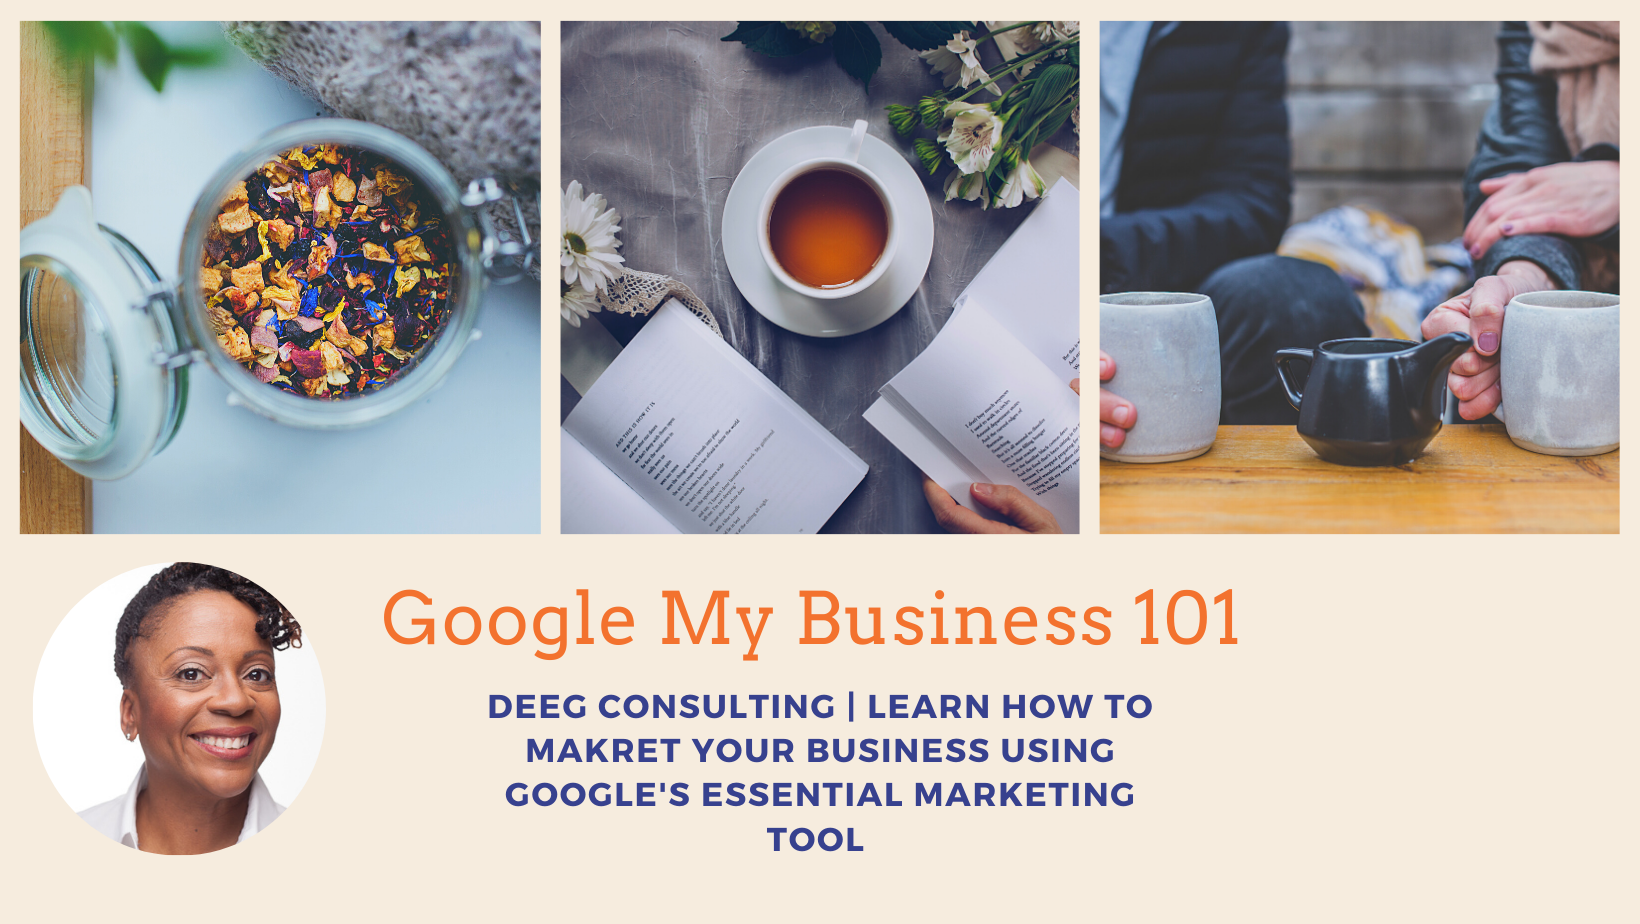 googlemybusiness ccoahing class with debra gibson welch of deeg consulting 